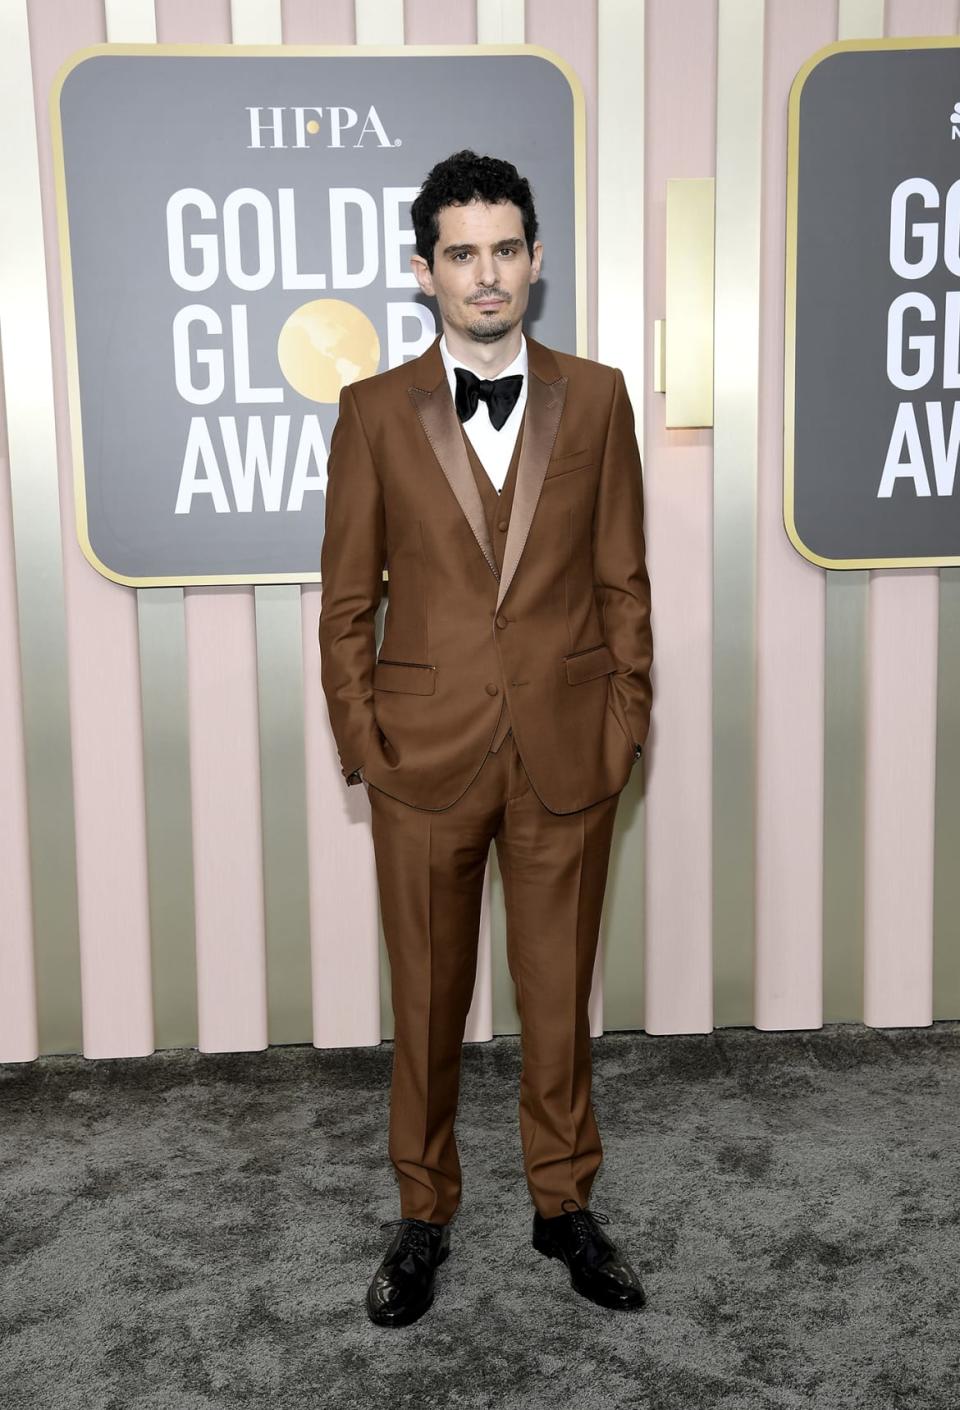 <div class="inline-image__caption"><p>Damien Chazelle arrives at the 80th Annual Golden Globe Awards held at the Beverly Hilton Hotel on January 10, 2023 in Beverly Hills, California.</p></div> <div class="inline-image__credit">Kevork Djansezian/NBC via Getty Images</div>